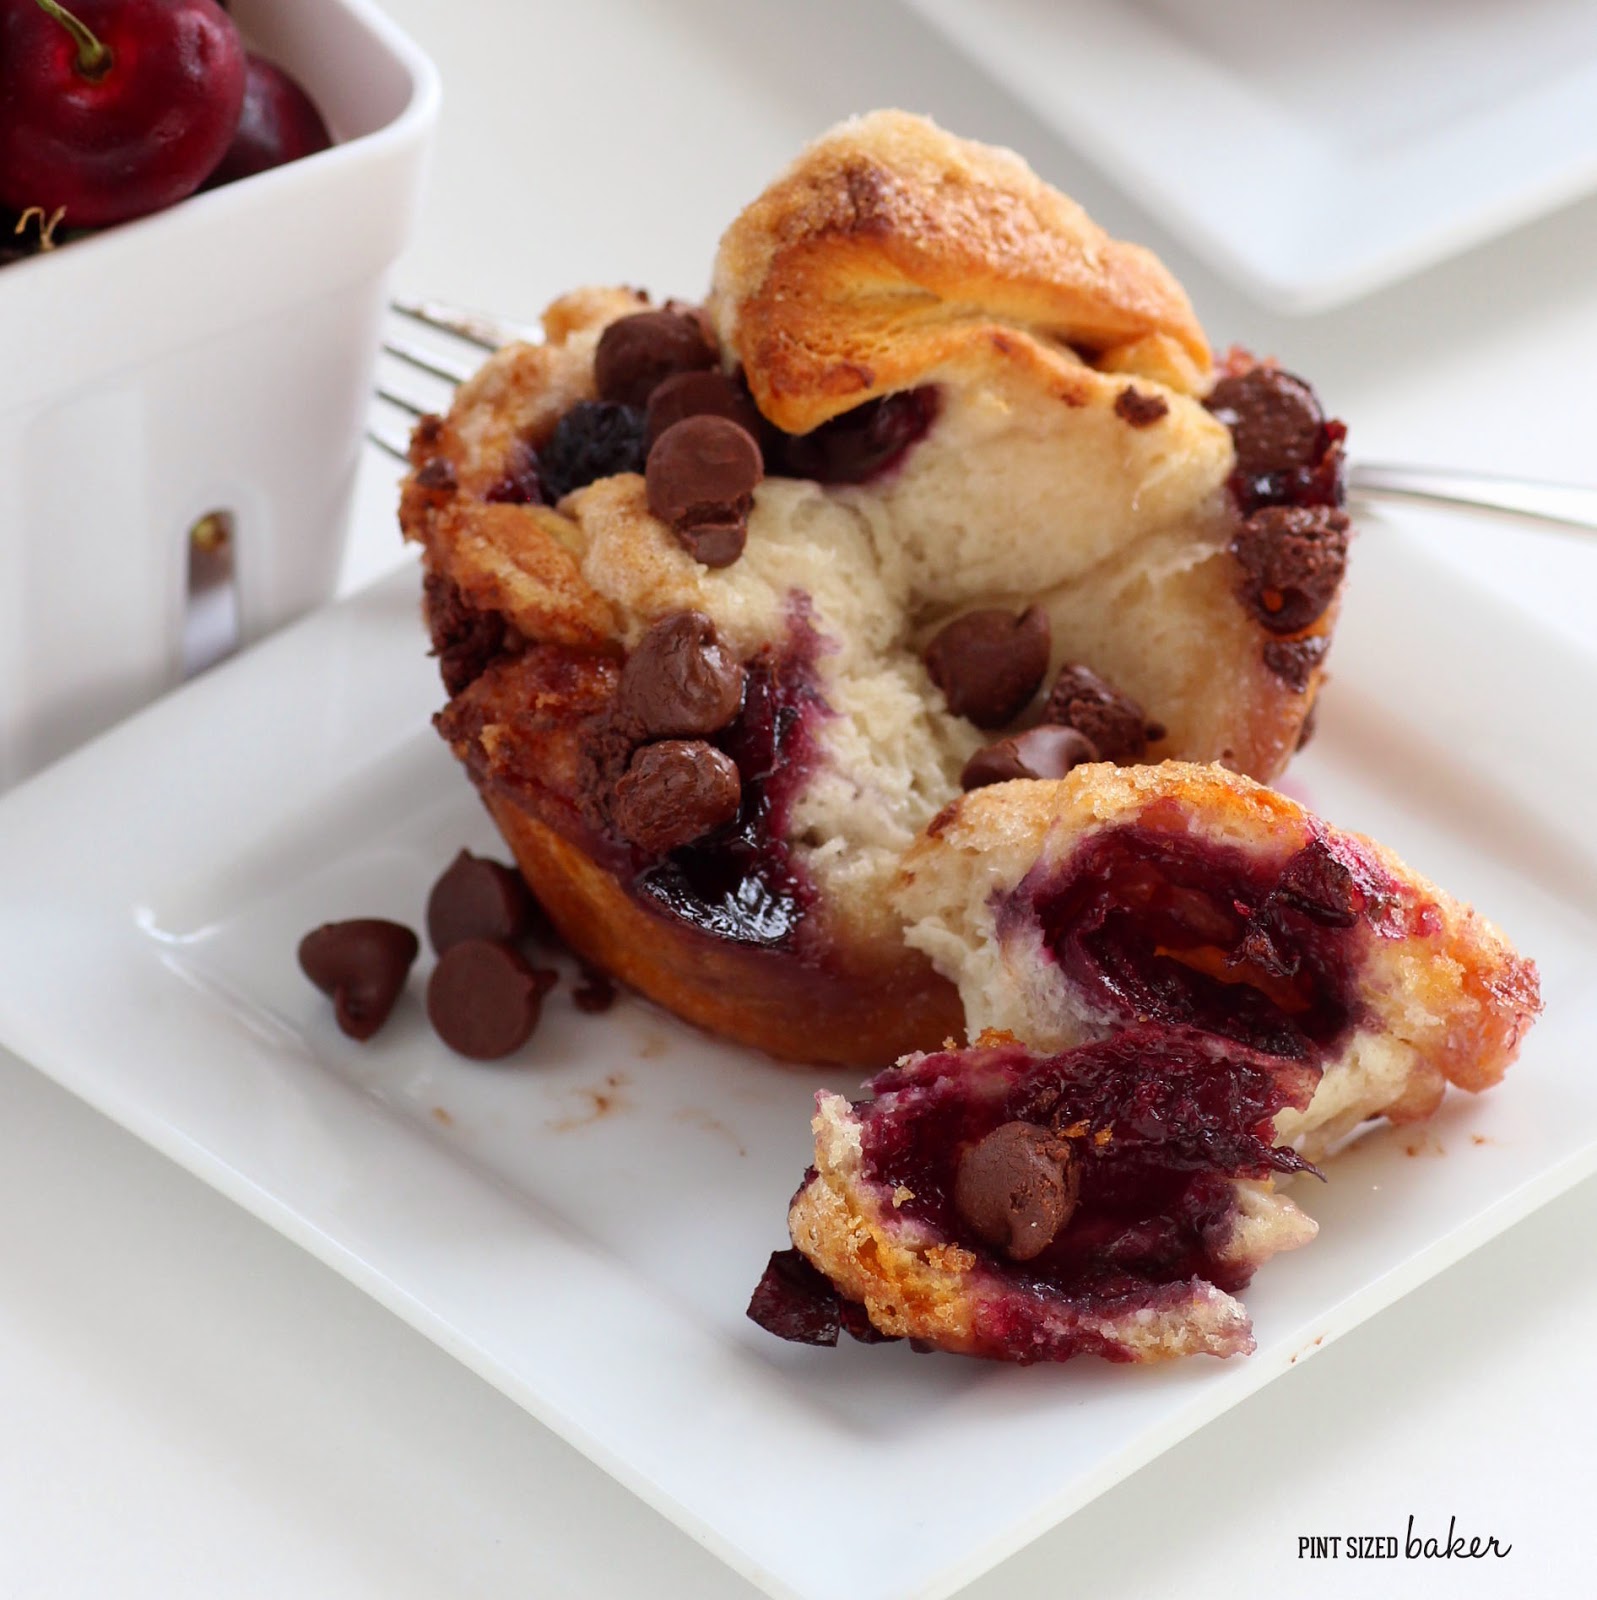 Cherry Stuffed Monkey Bread with Chocolate Chips is great for breakfast or dessert.